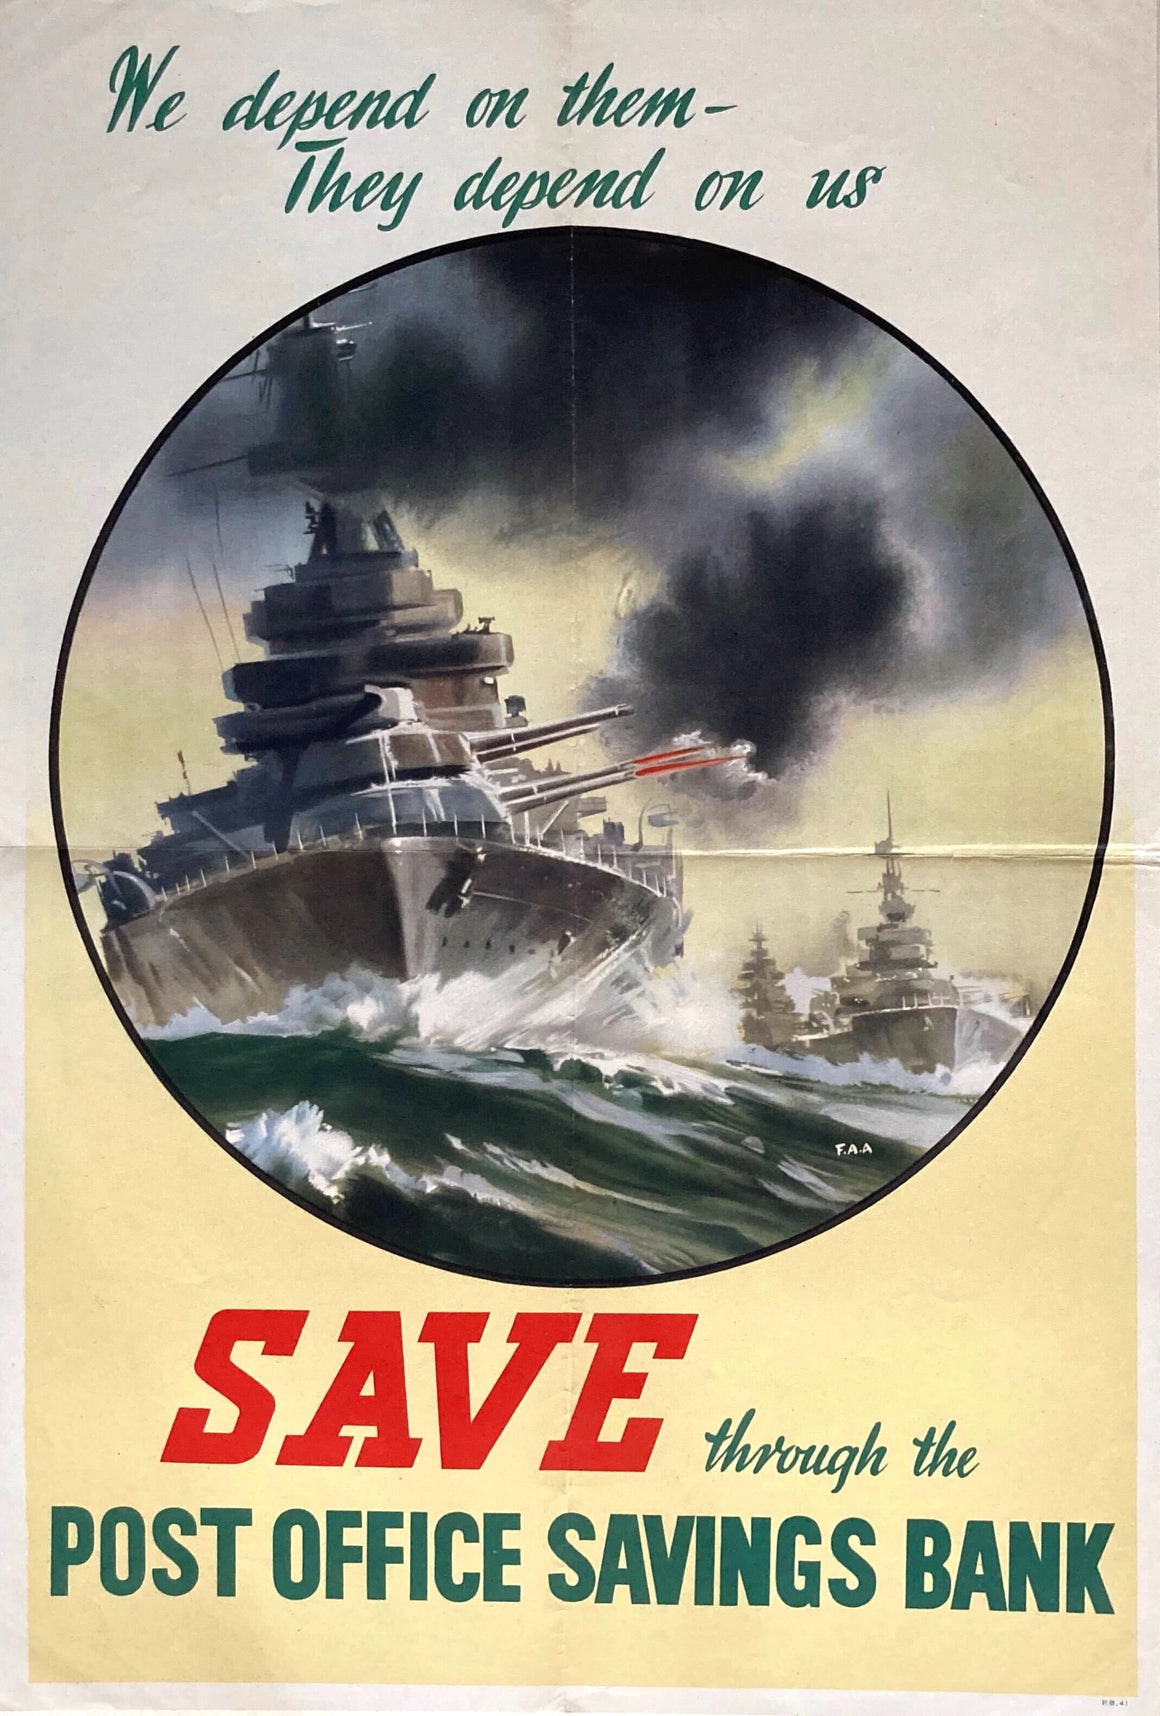 "We depend on them- They depend on us. Save through the Post Office Savings Bank" Vintage WWII Poster, 1941